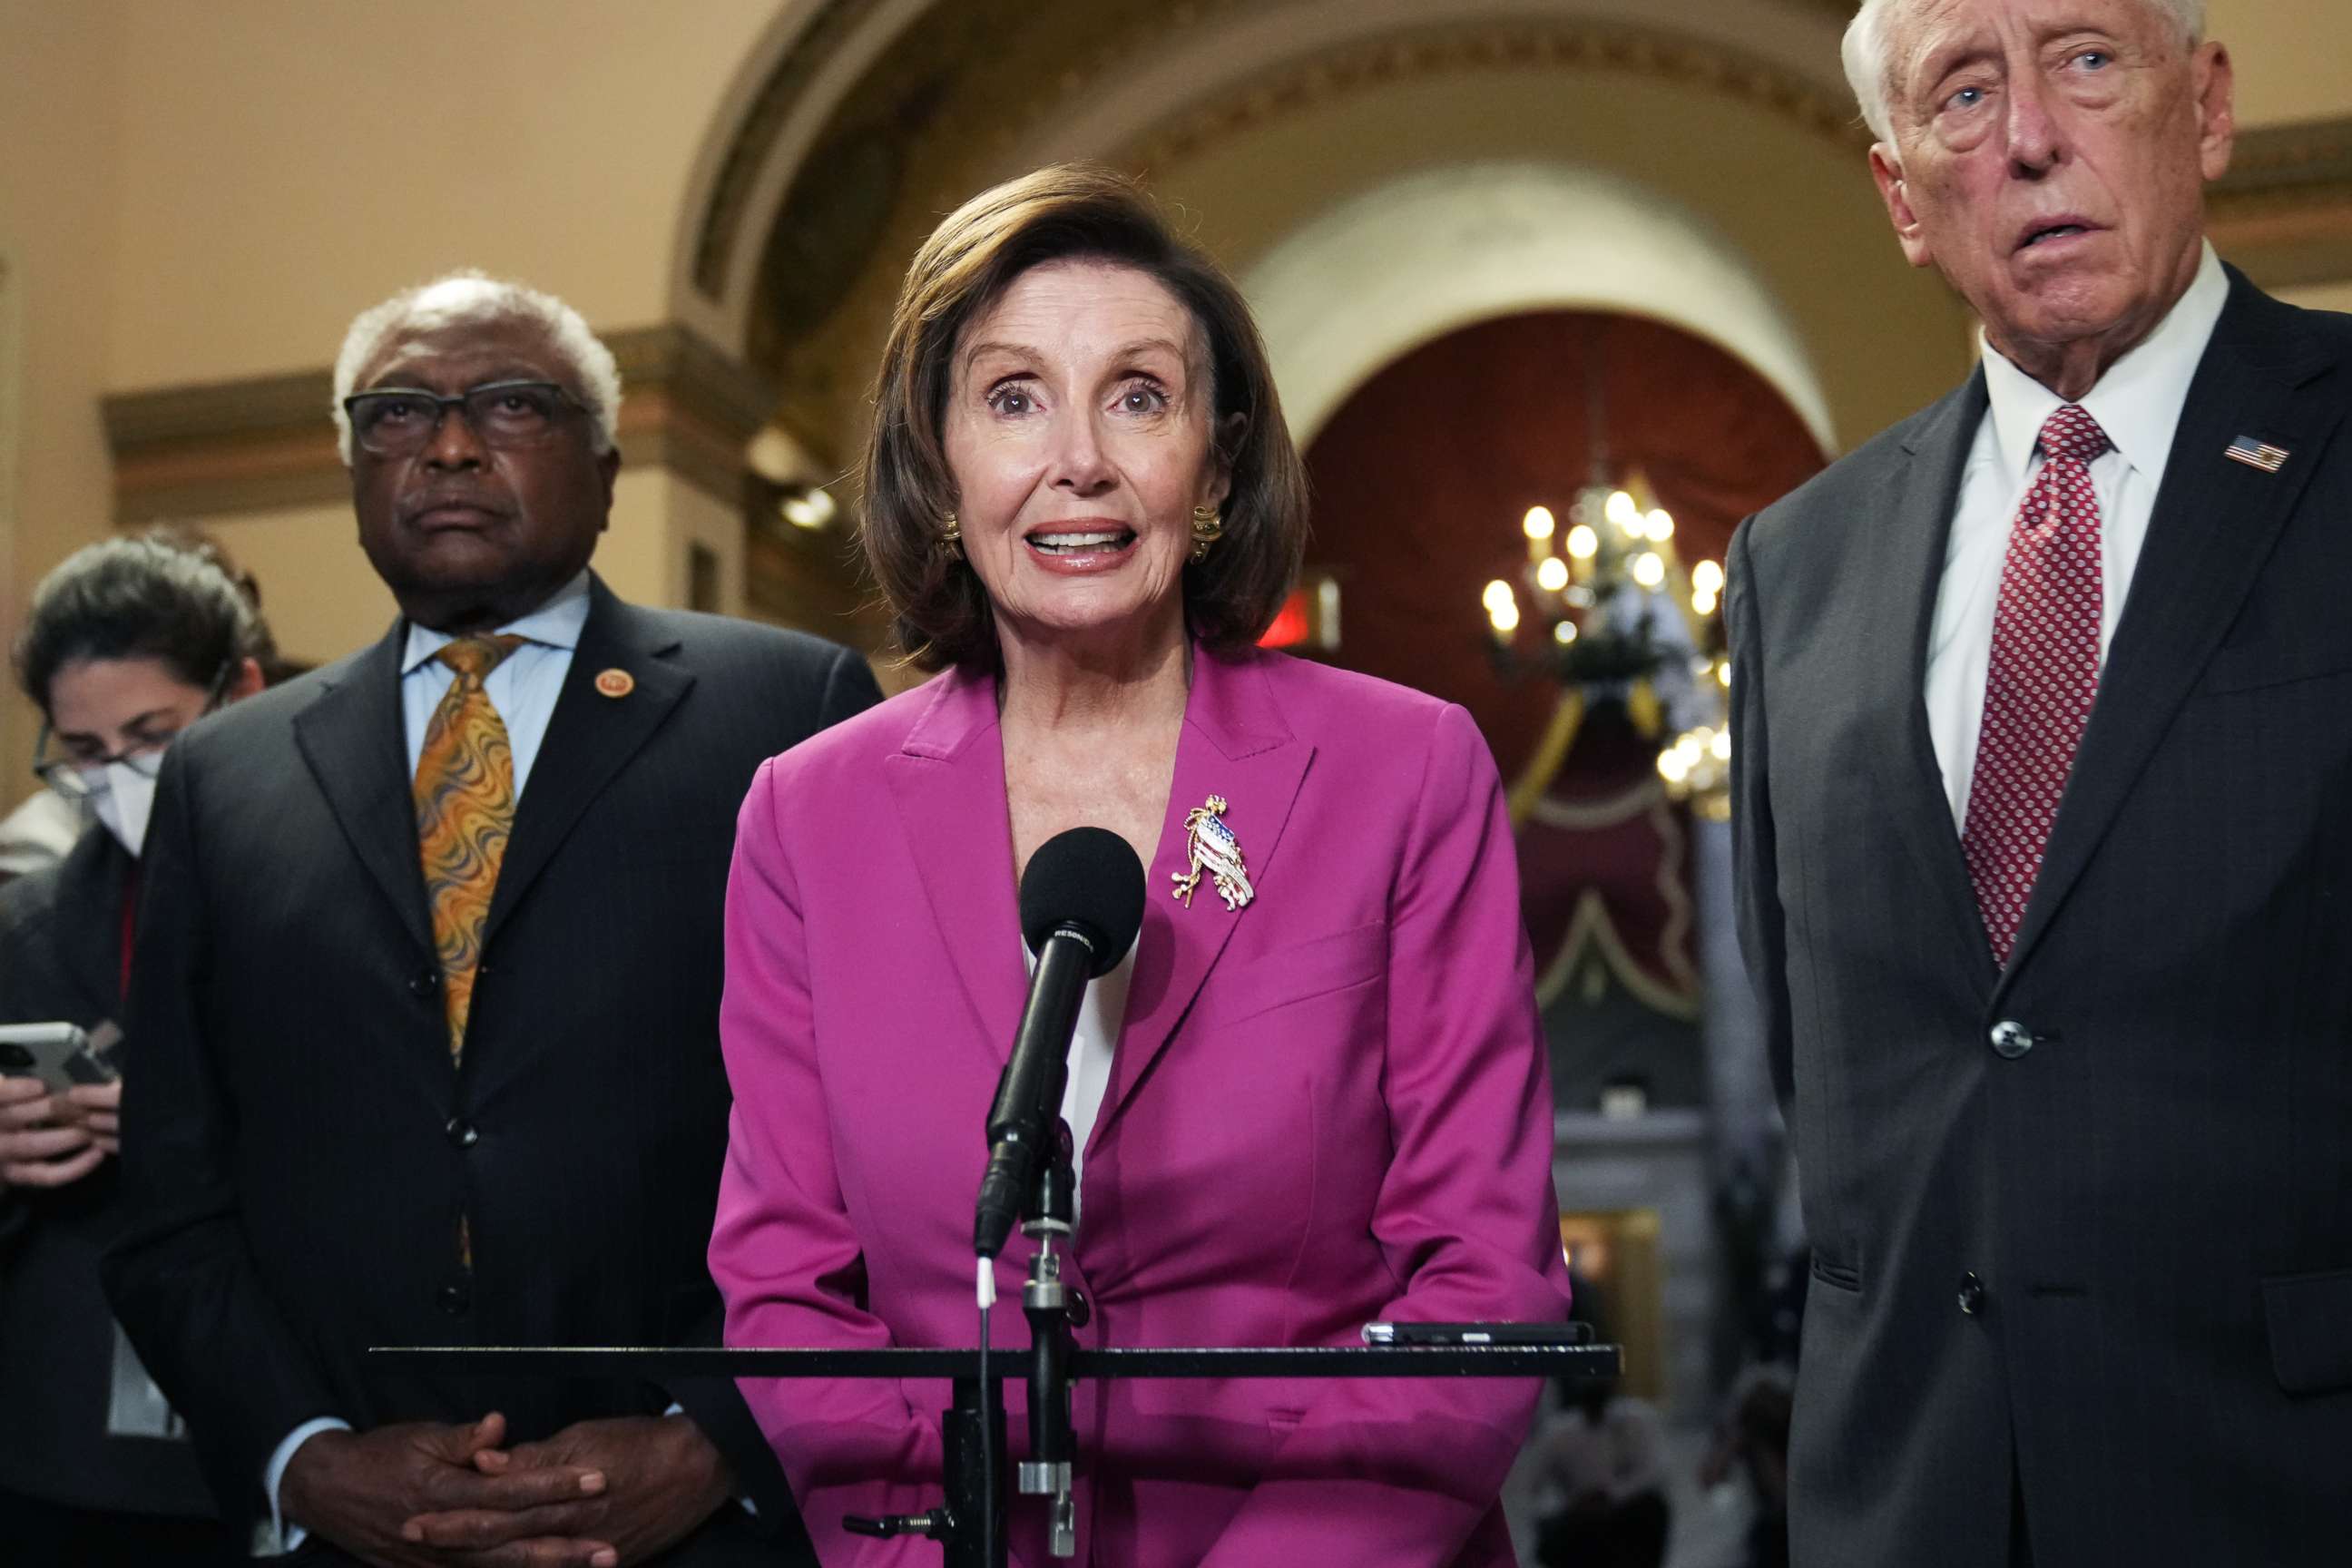 PHOTO: Speaker of the House Nancy Pelosi, House Majority Leader Steny Hoyer, and House Majority Whip Jim Clyburn conduct a news conference in the U.S. Capitol on Friday, Nov. 5, 2021.